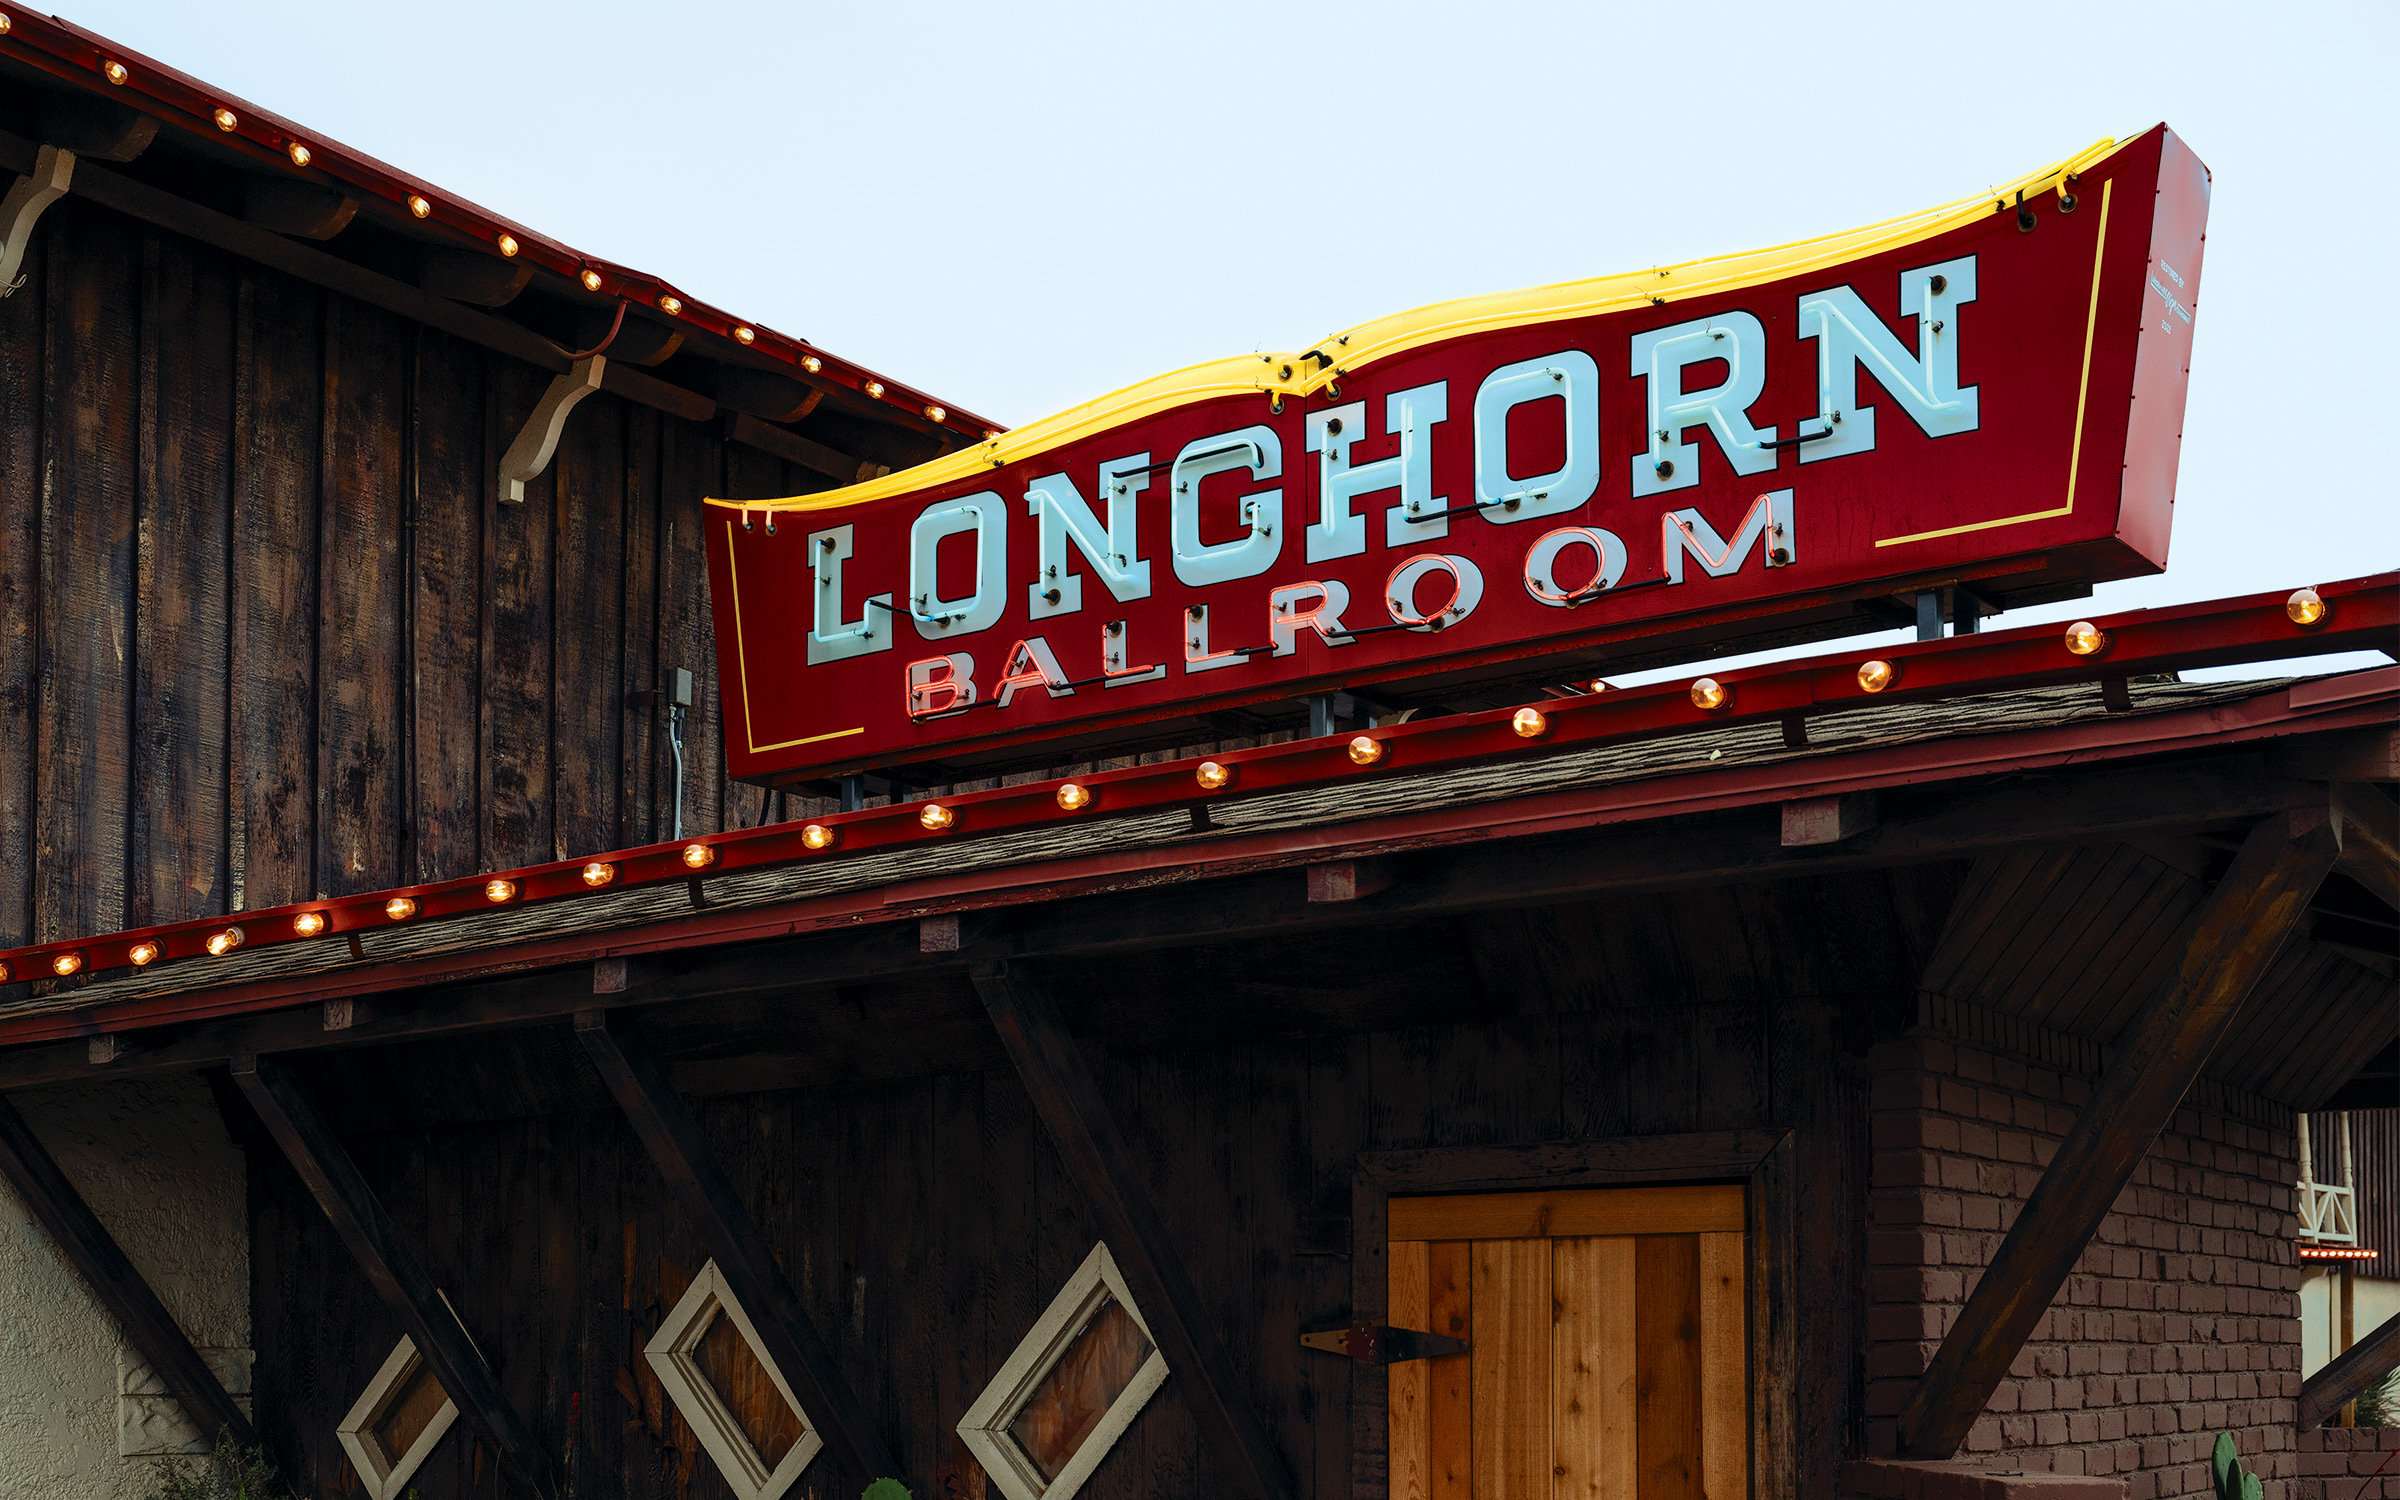 The Longhorn Ballroom, Texass Most Historic Music Venue, Swings to Life picture